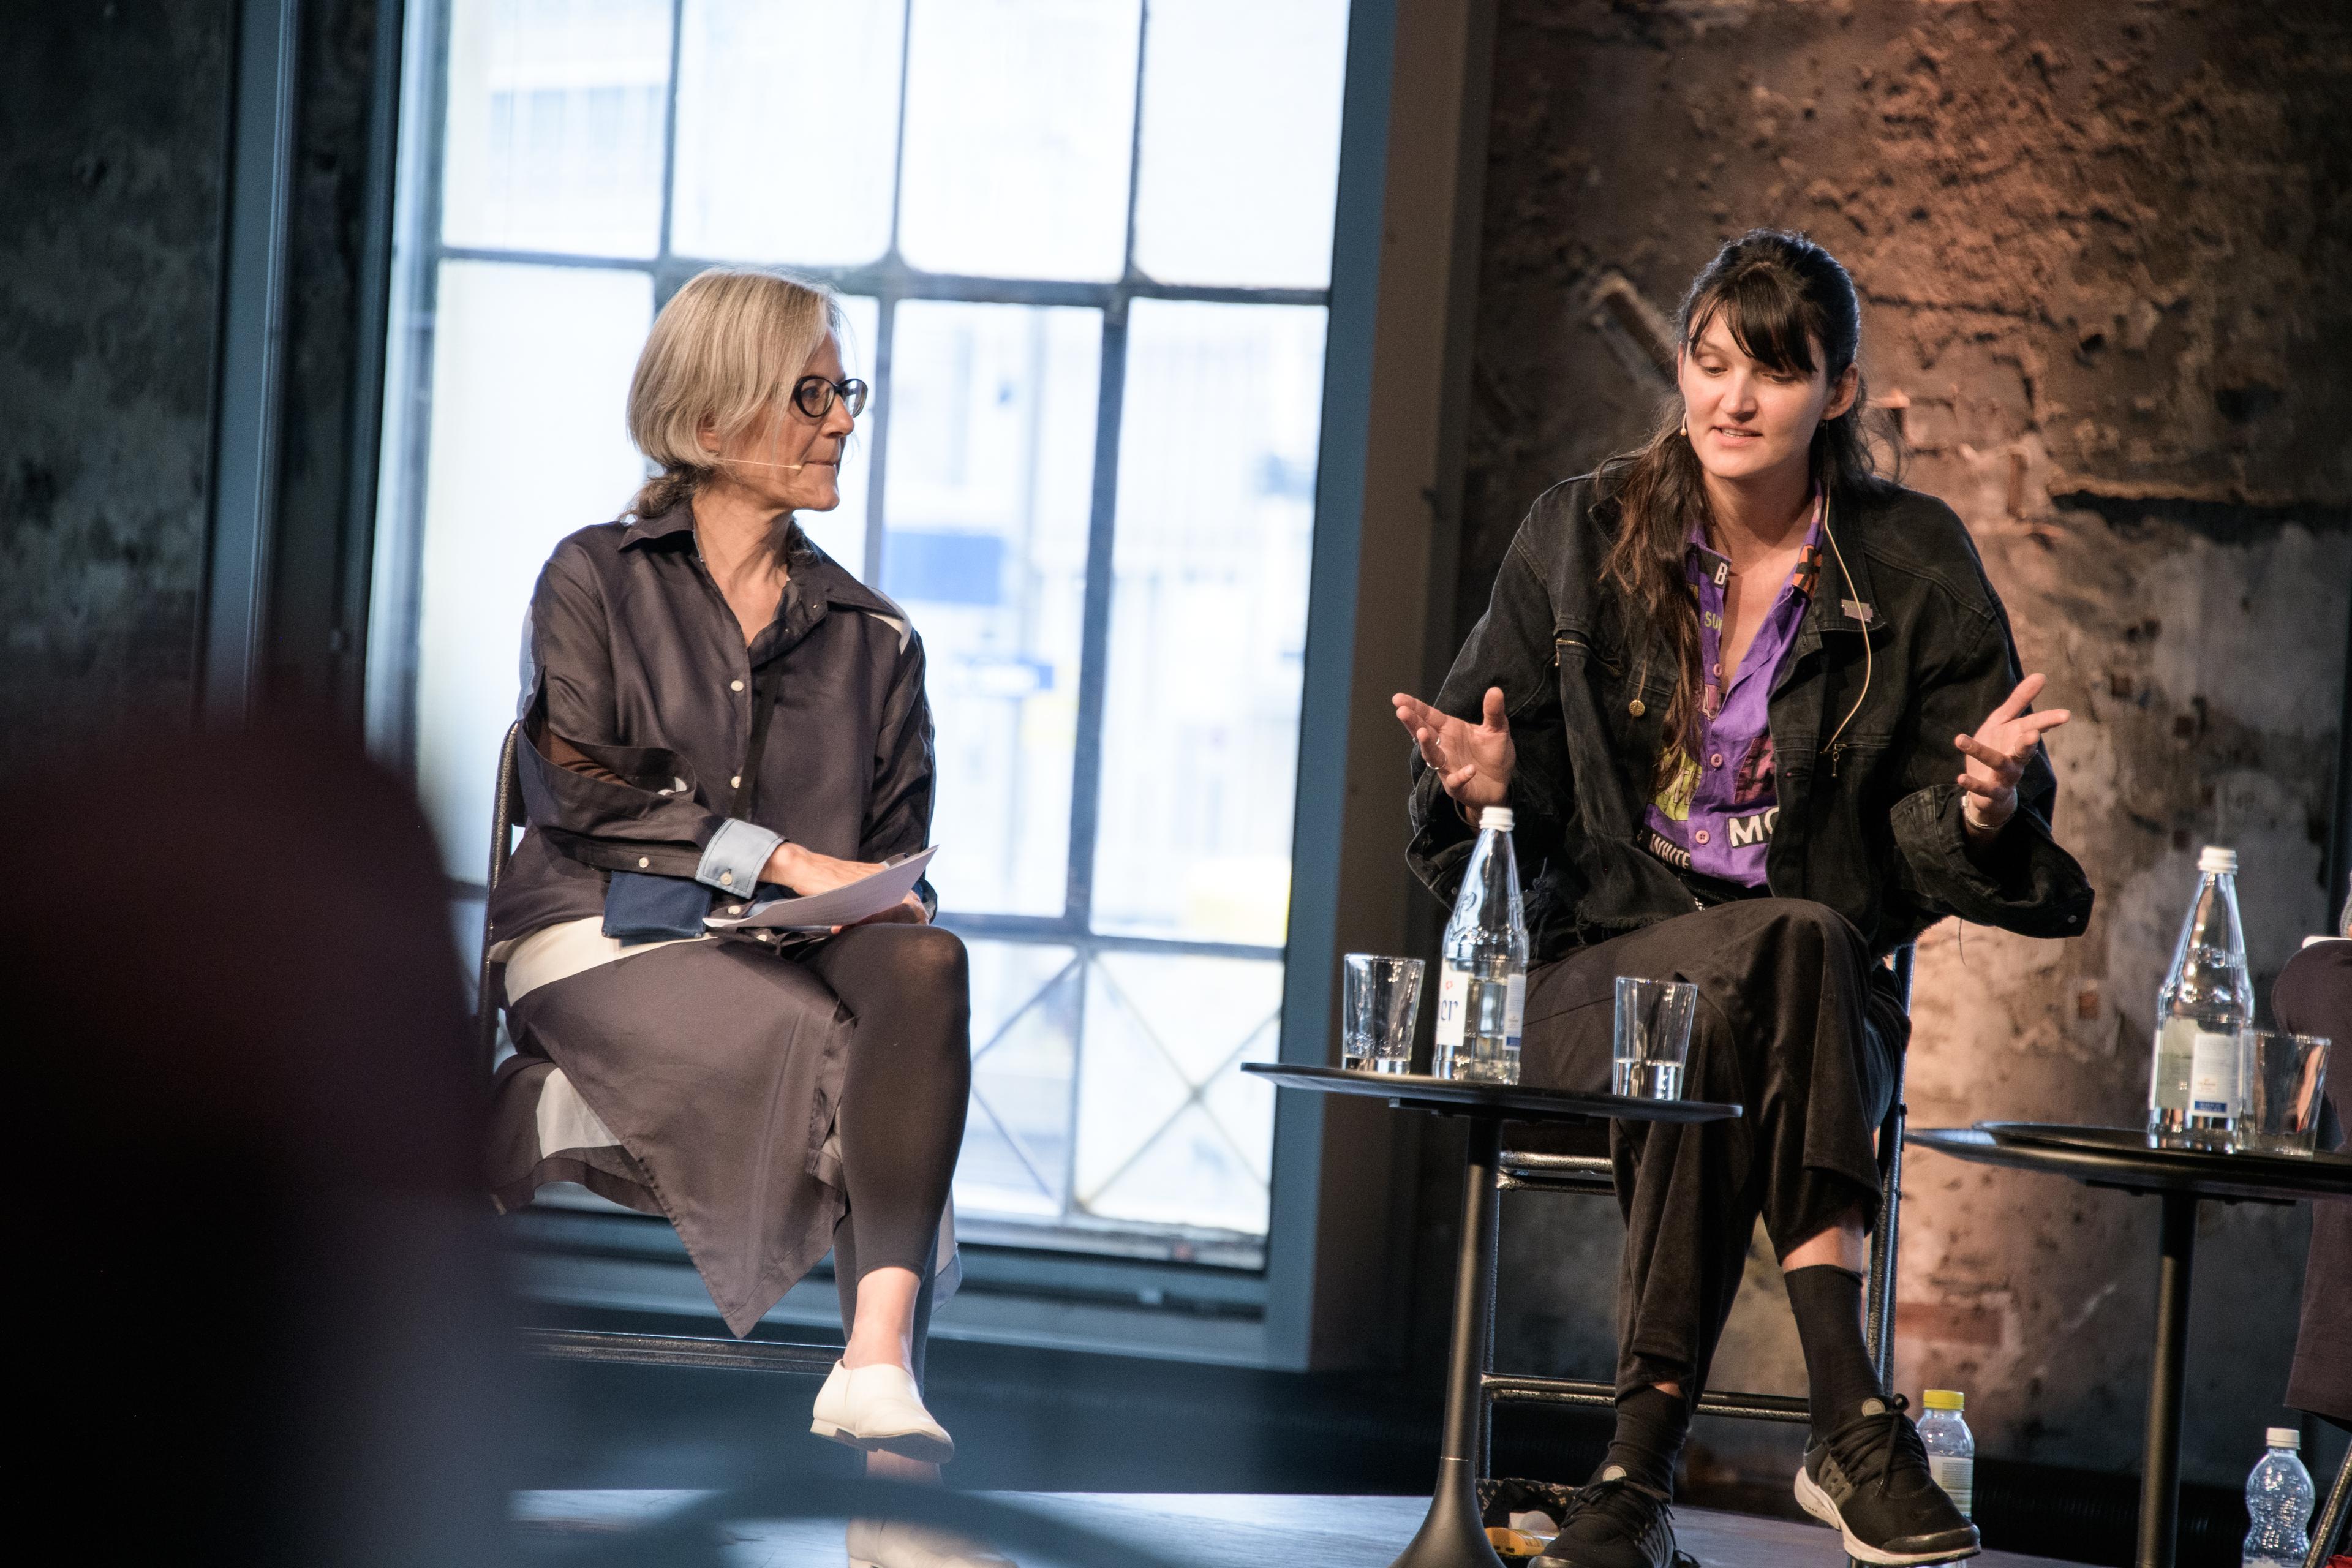 Panel Discussion with Ernestyna Orlowska, Pascale Grau, Laurence Wagner, Marianne Burki, Madeleine Amsler / Photo Credit: Tine Edel, Swiss Performance Art Award 2021